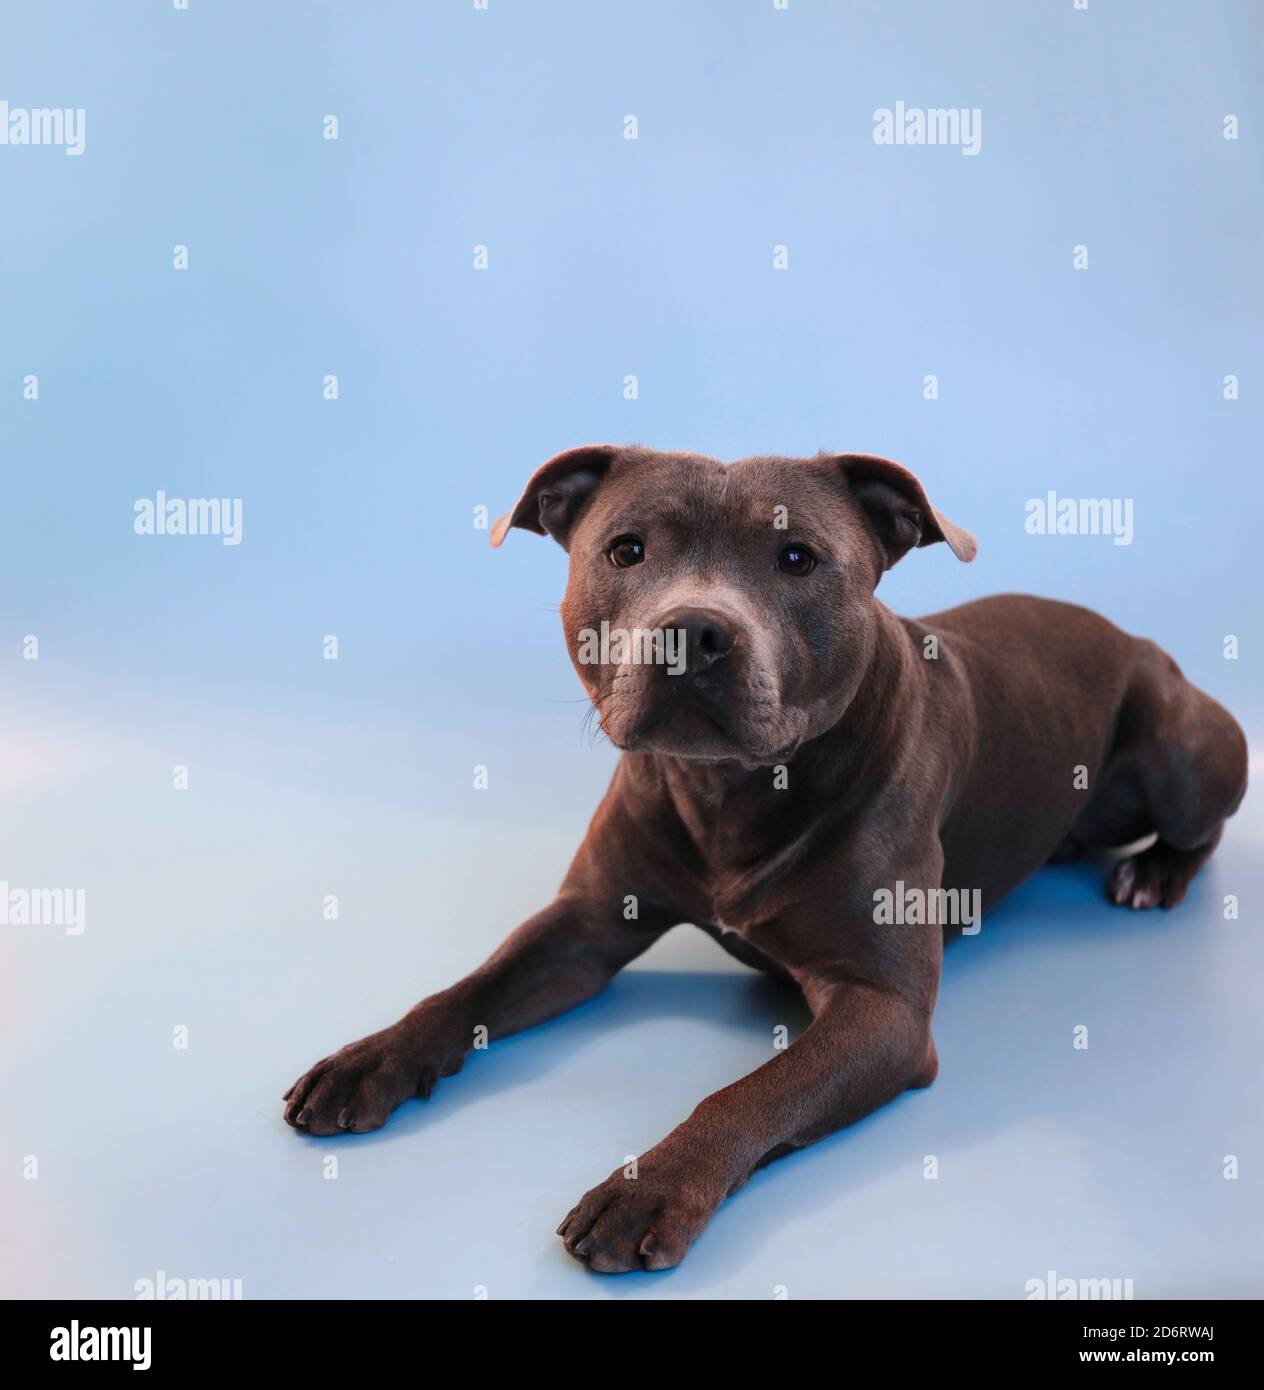 Staffordshire Bull Terrier Isolated on Light Blue. Blue Staffy Lies Down on Blue Background. Stock Photo